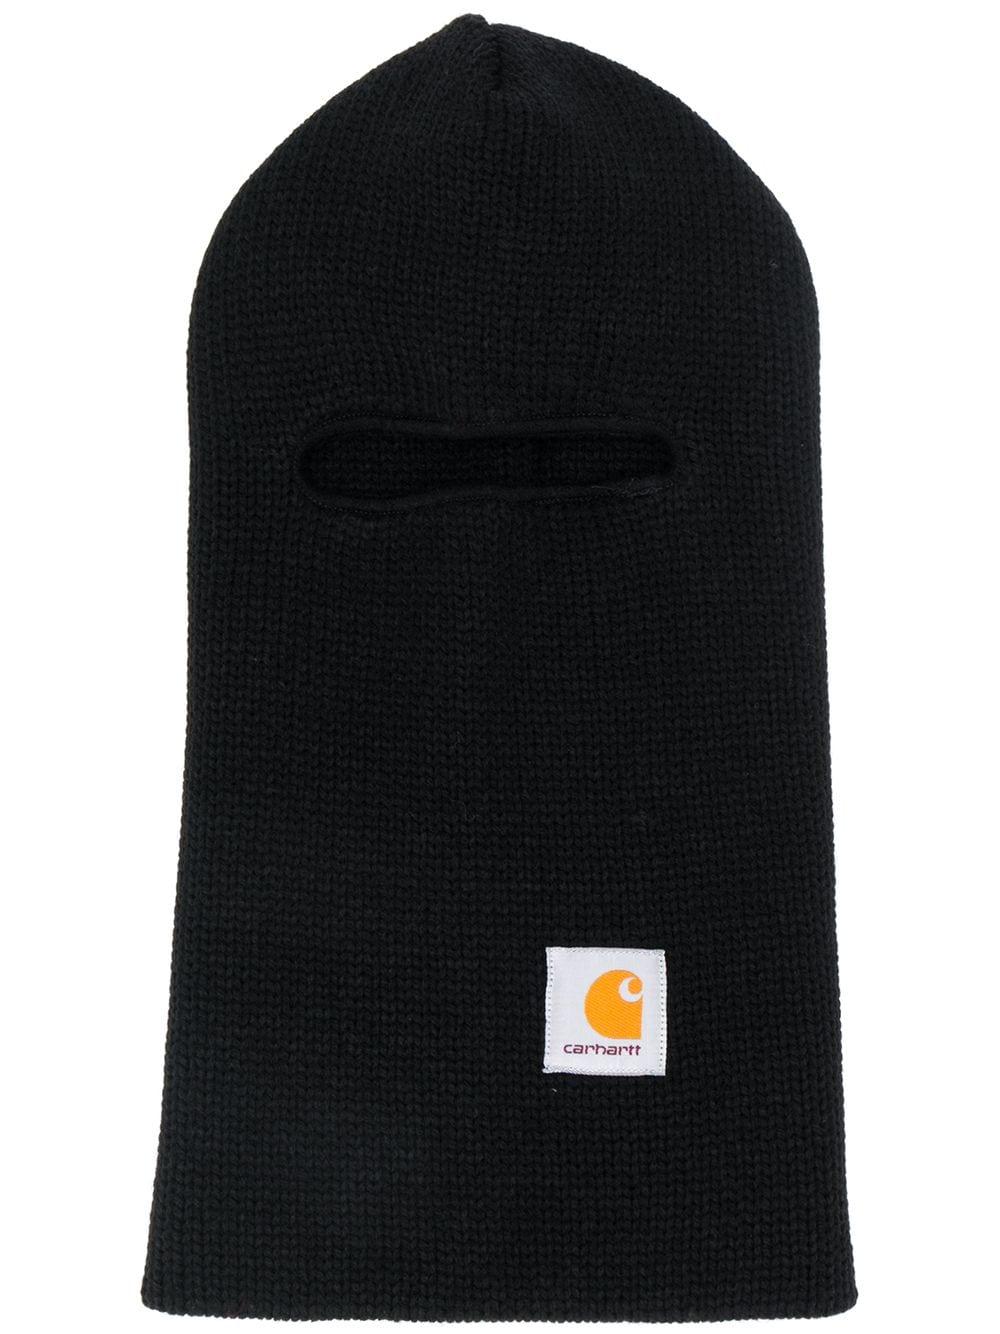 Carhartt WIP Synthetic Storm Mask Beanie in Black - Lyst